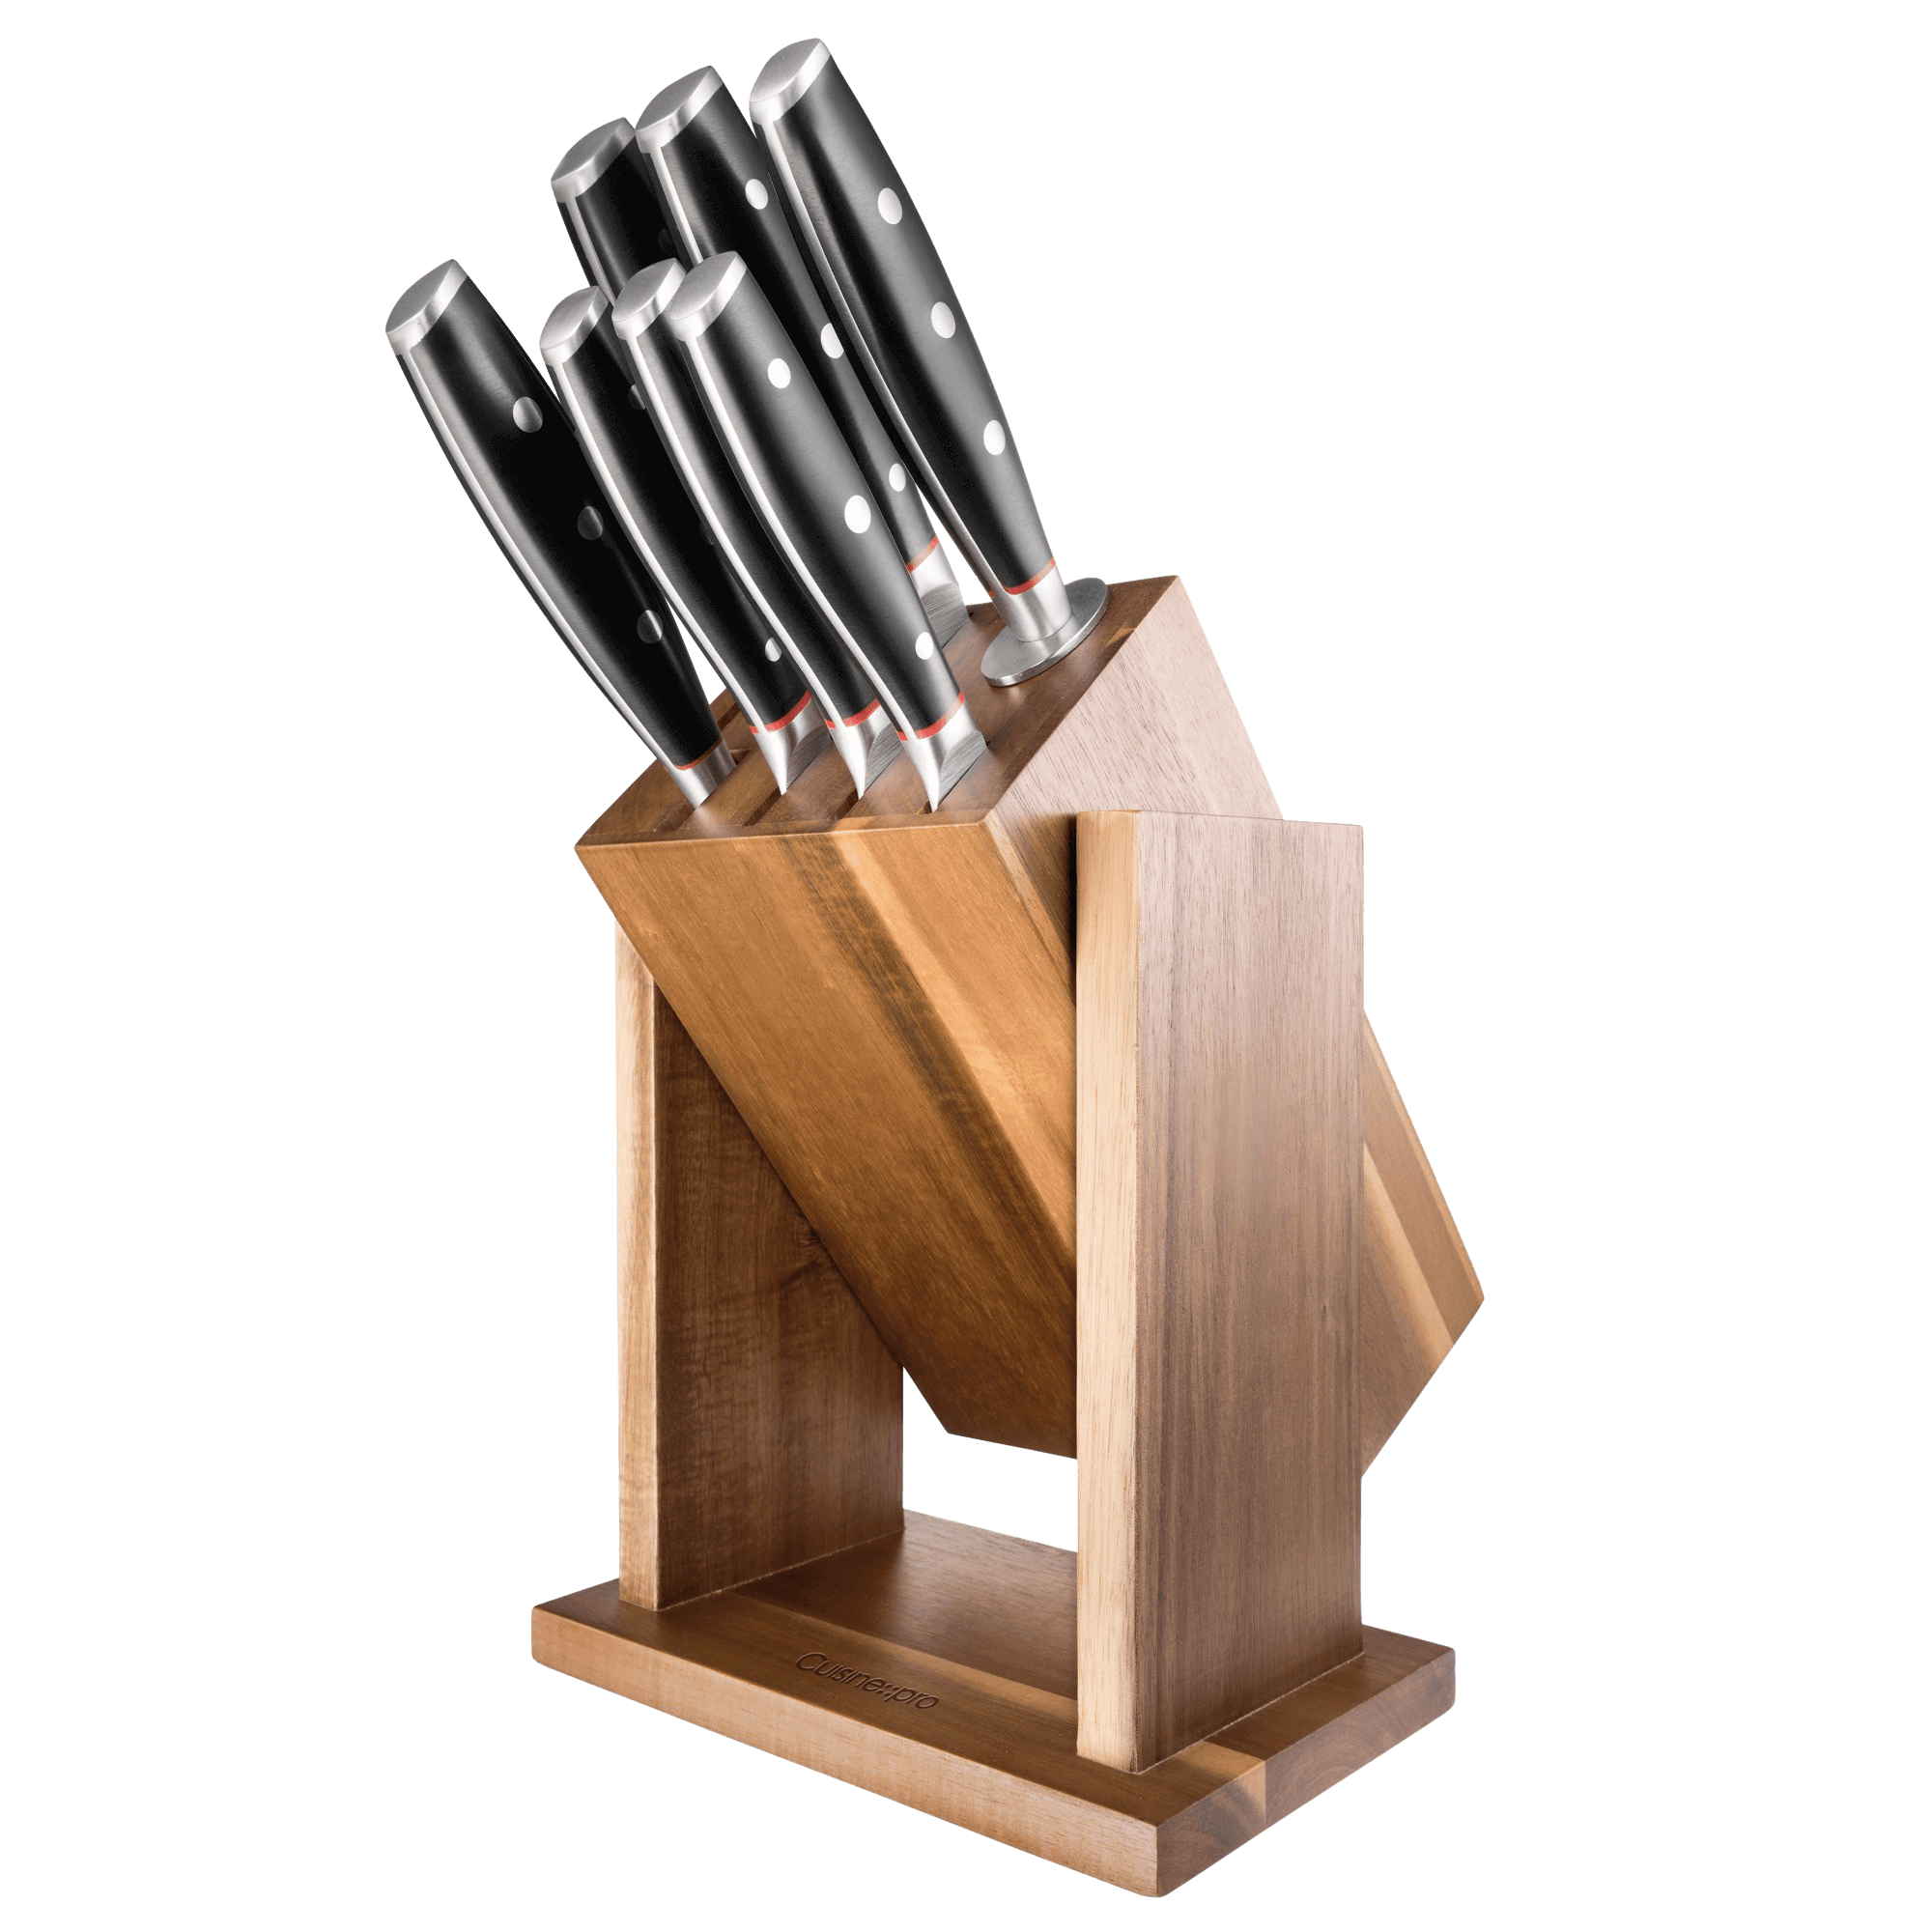 Classic Redesigned German Steel Kitchen Knife Set in Gift Box丨Cool Gifts  for